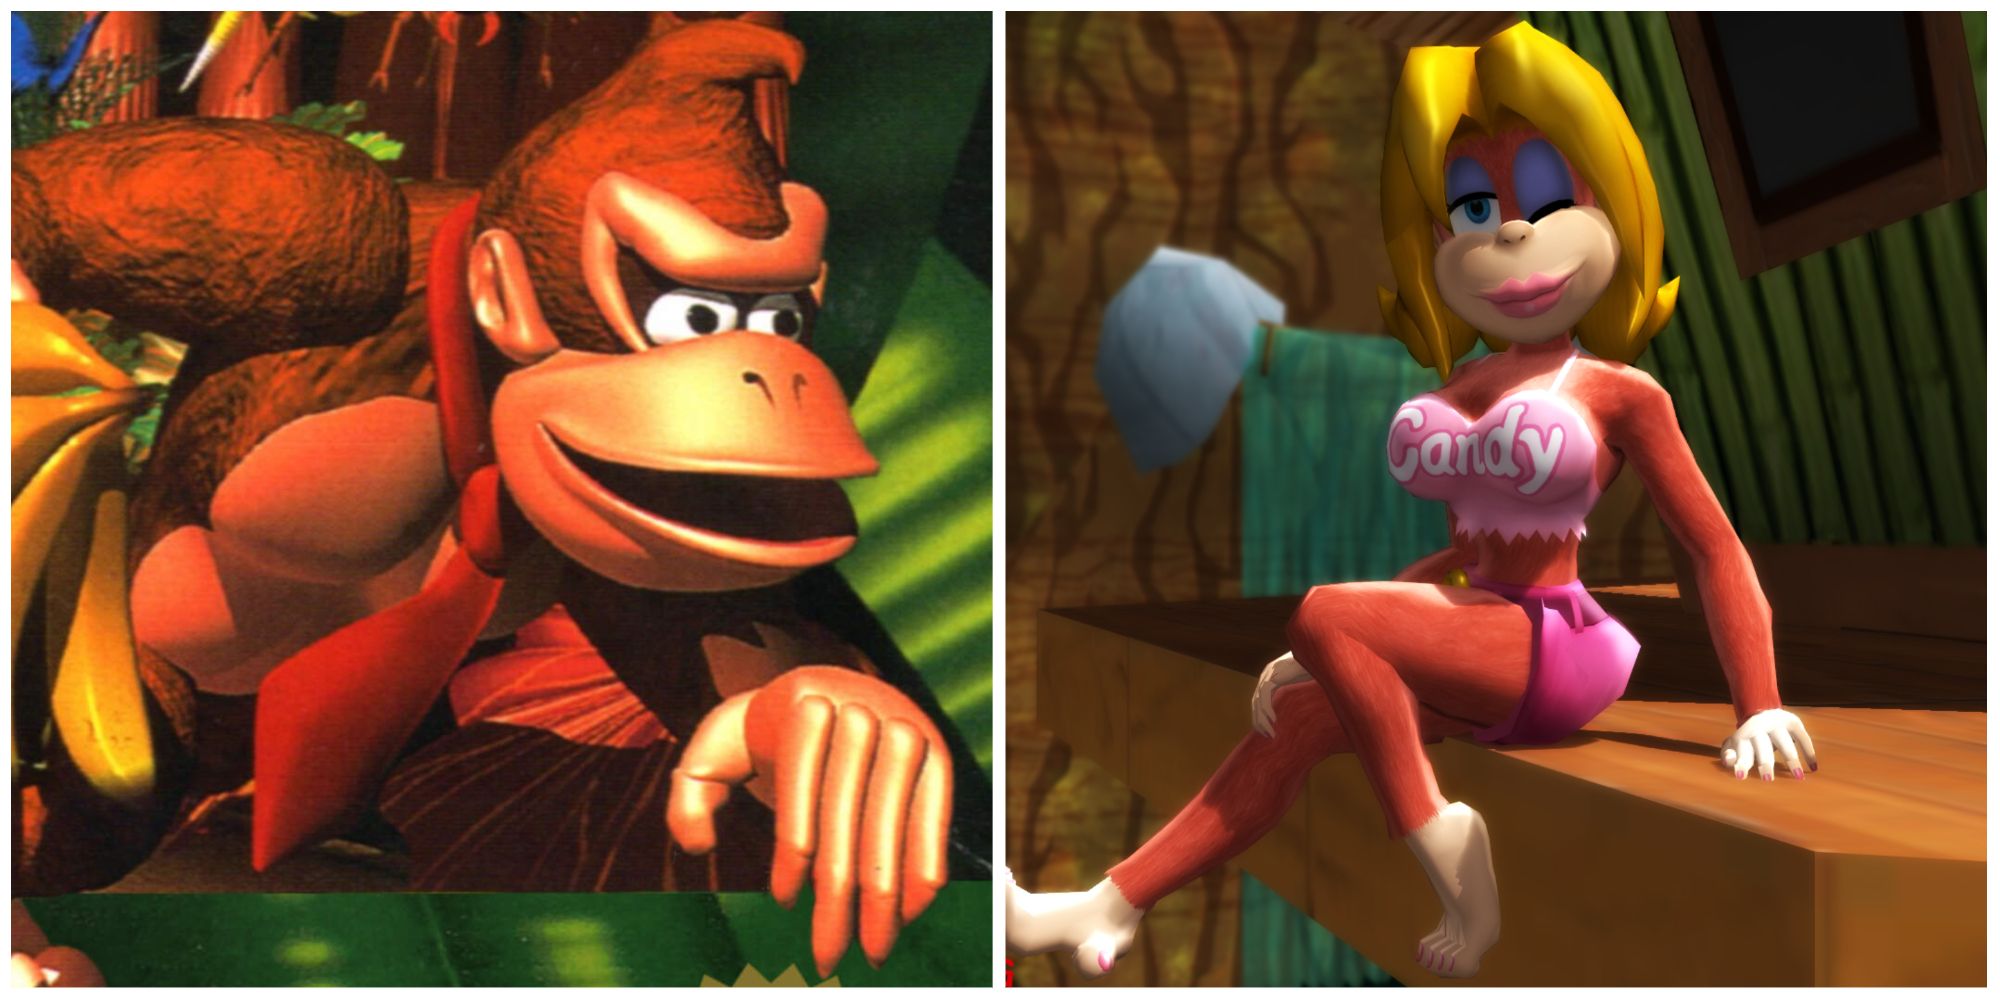 donkey and candy_kong